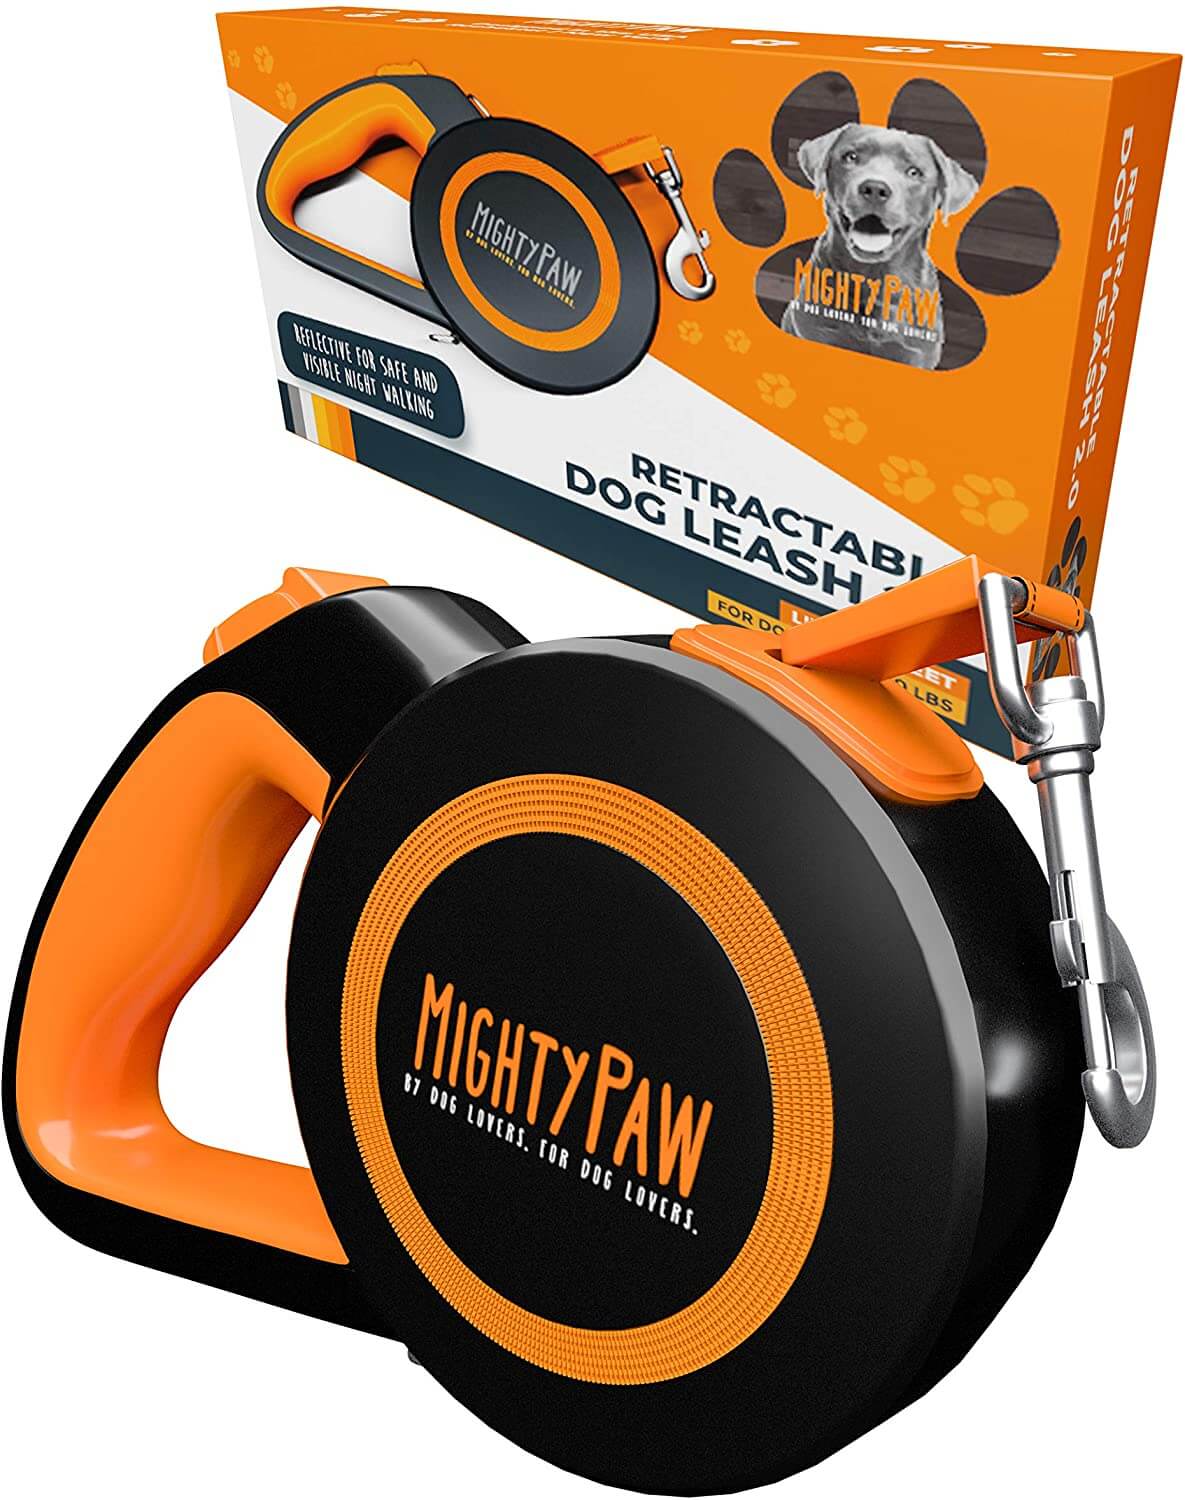 Mighty Paw Retractable Dog Leash 2.0